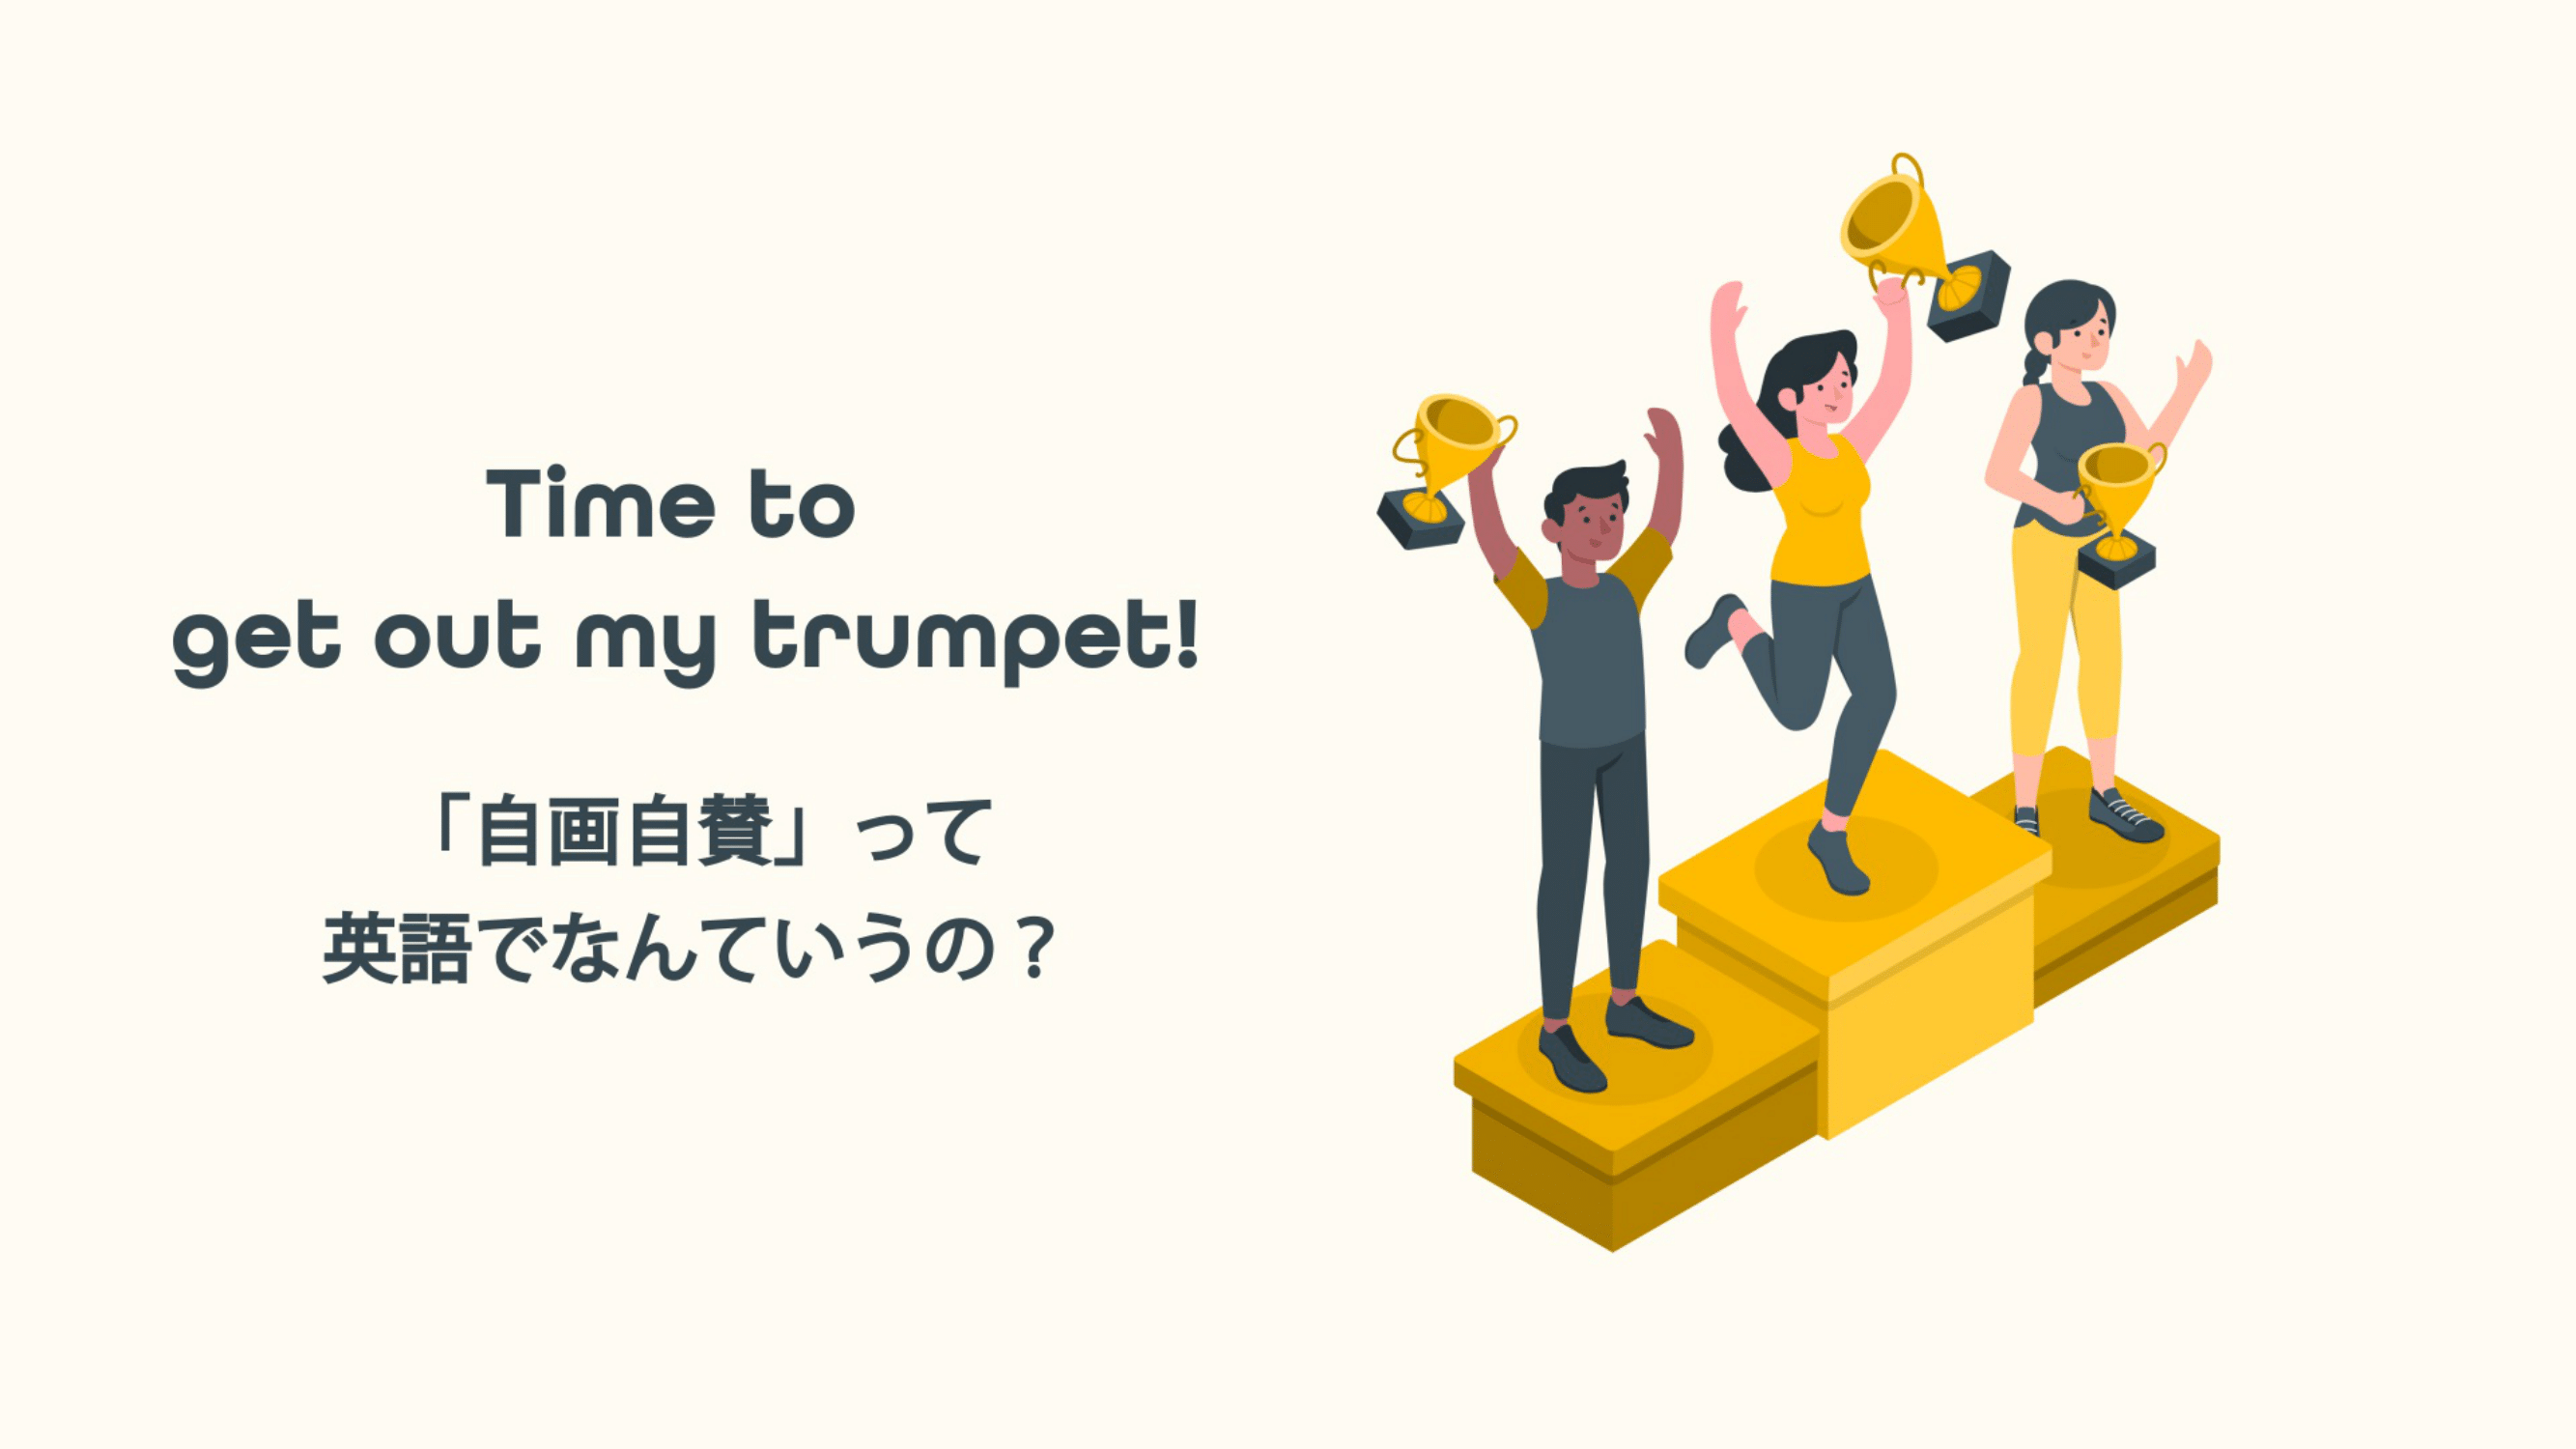  Time to get out my trumpet! 「自画自賛」って英語でなんていうの？